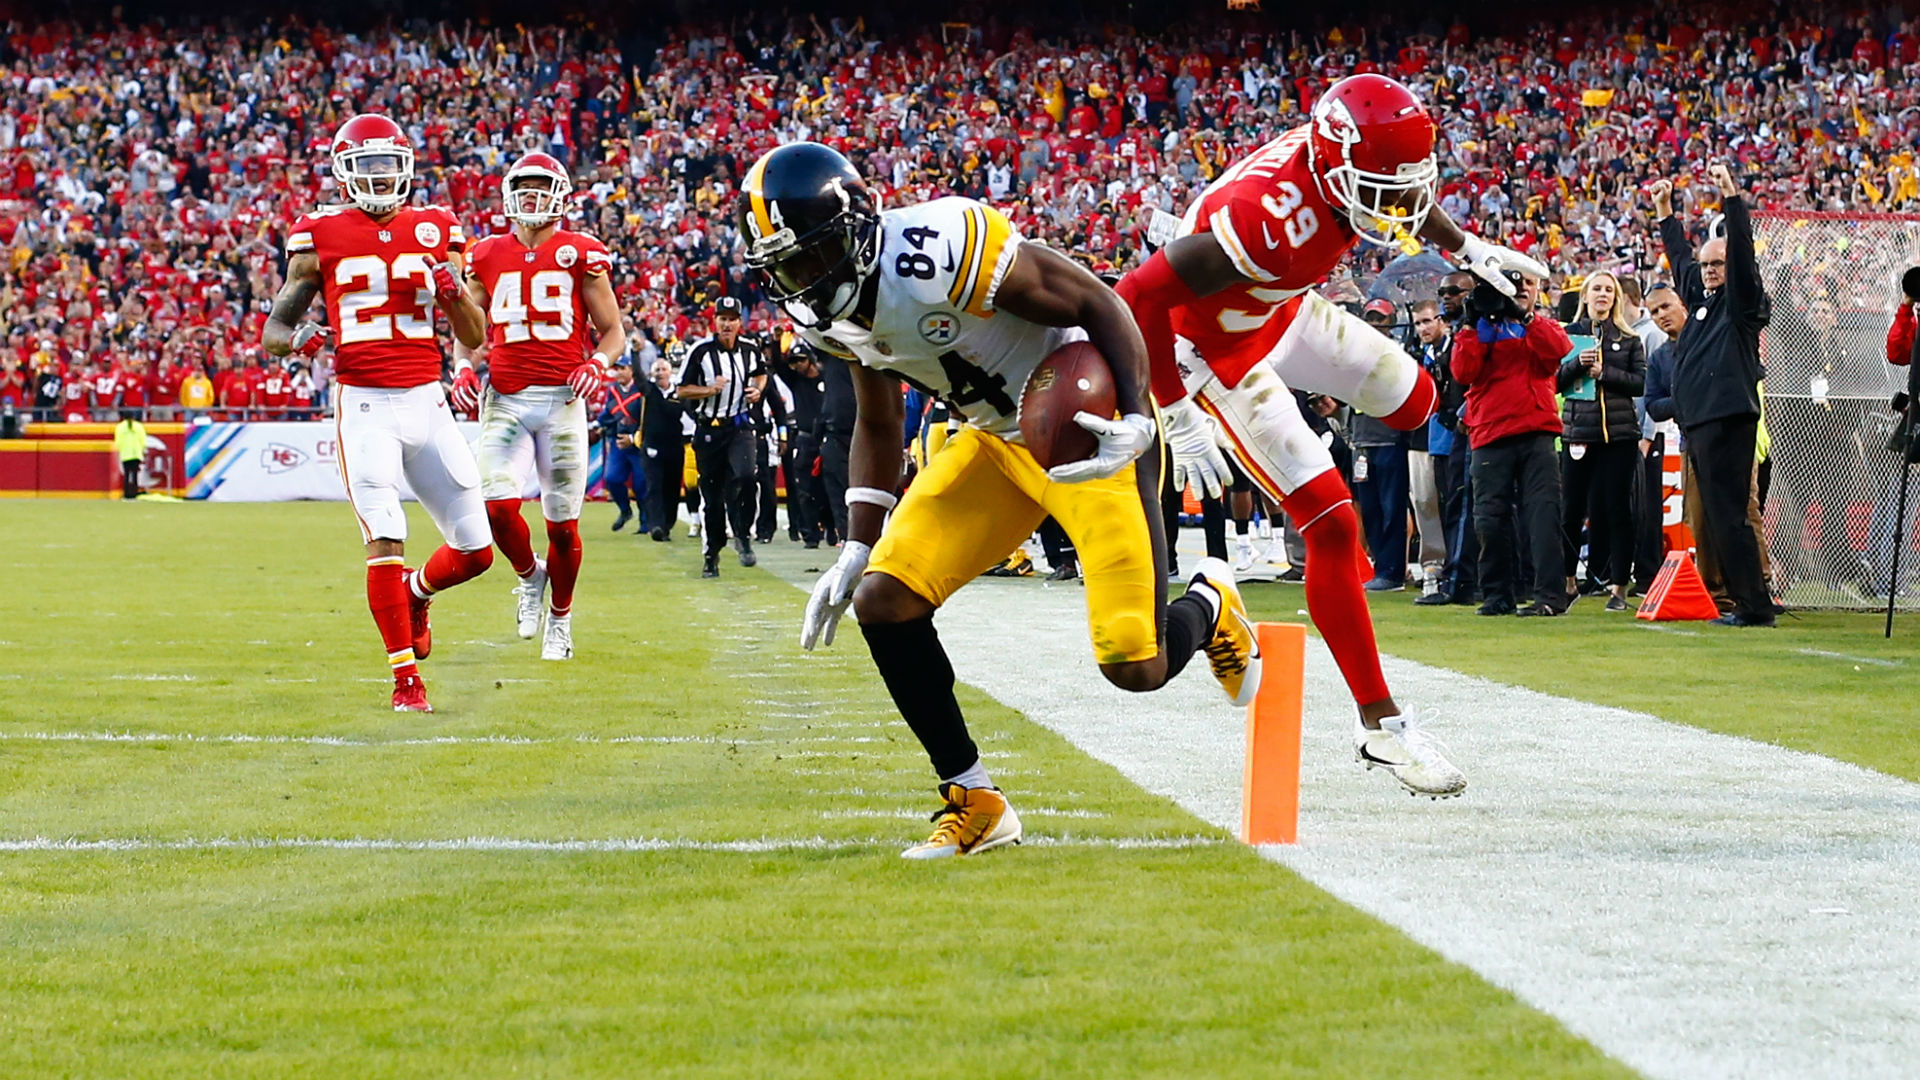 Steelers vs. Chiefs Score, results, highlights from Week 6 game in